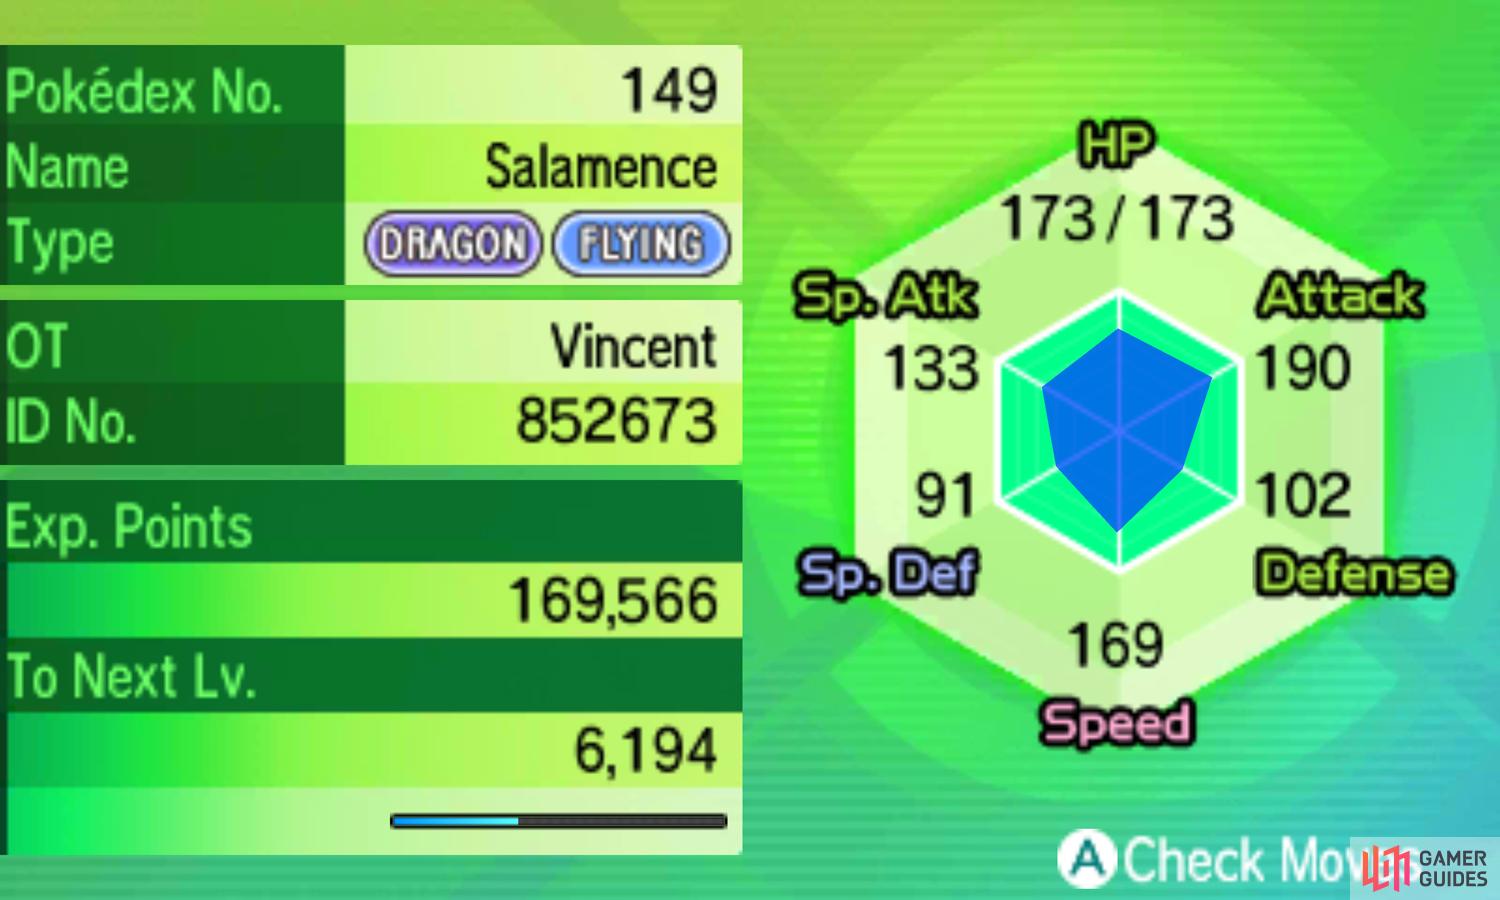 A Simple Guide to EVs, IVs, Natures, & More in Pokemon Scarlet and Violet 